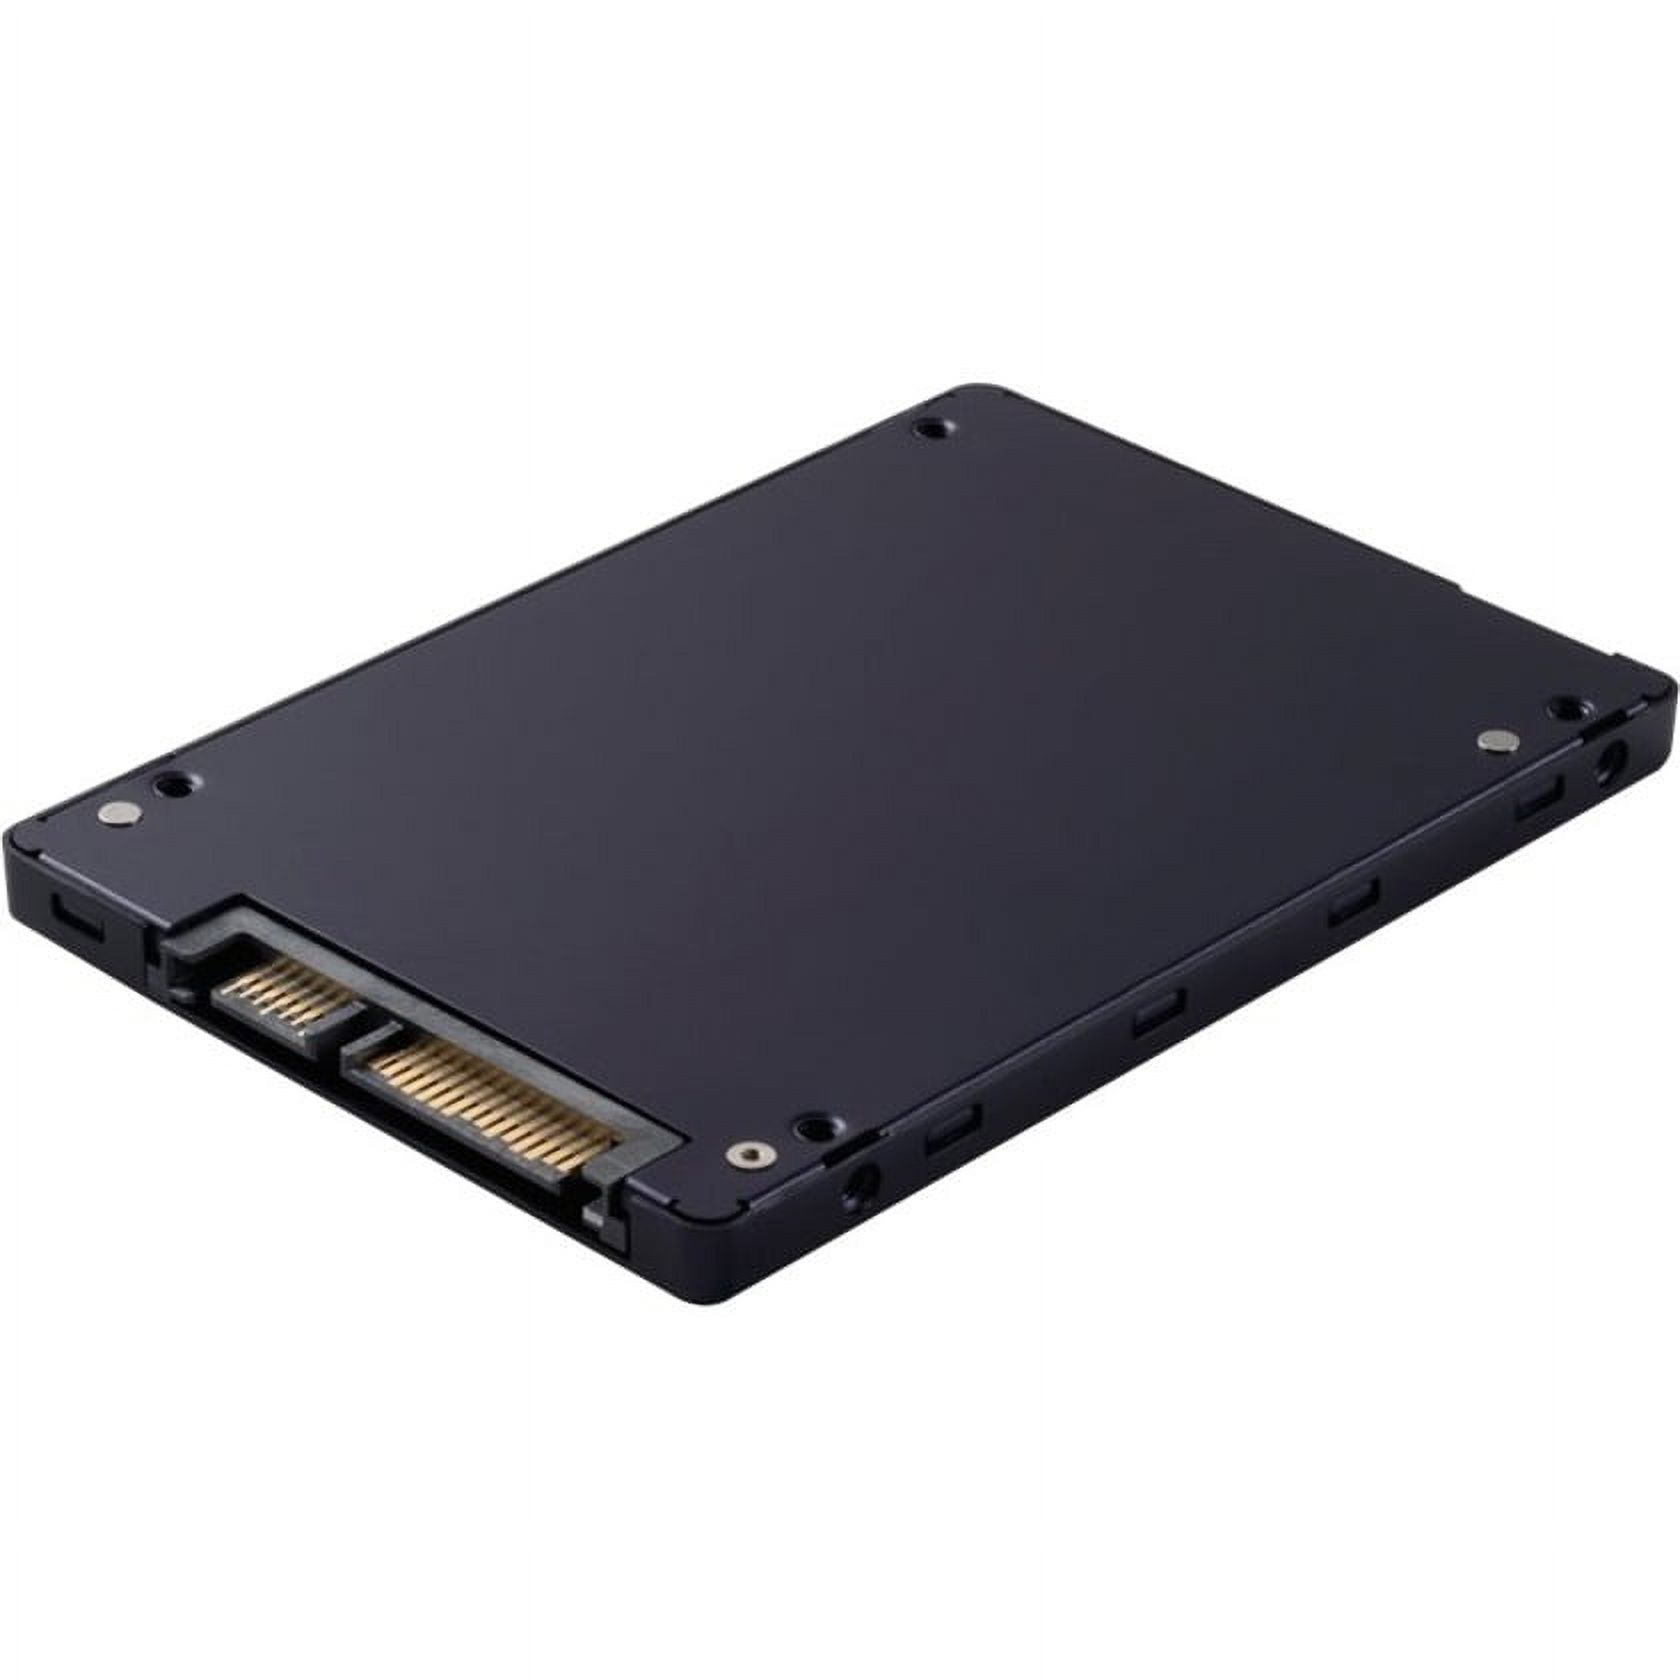 Lenovo 7SD7A05763 960 GB 2.5" Internal Solid State Drive - image 1 of 2